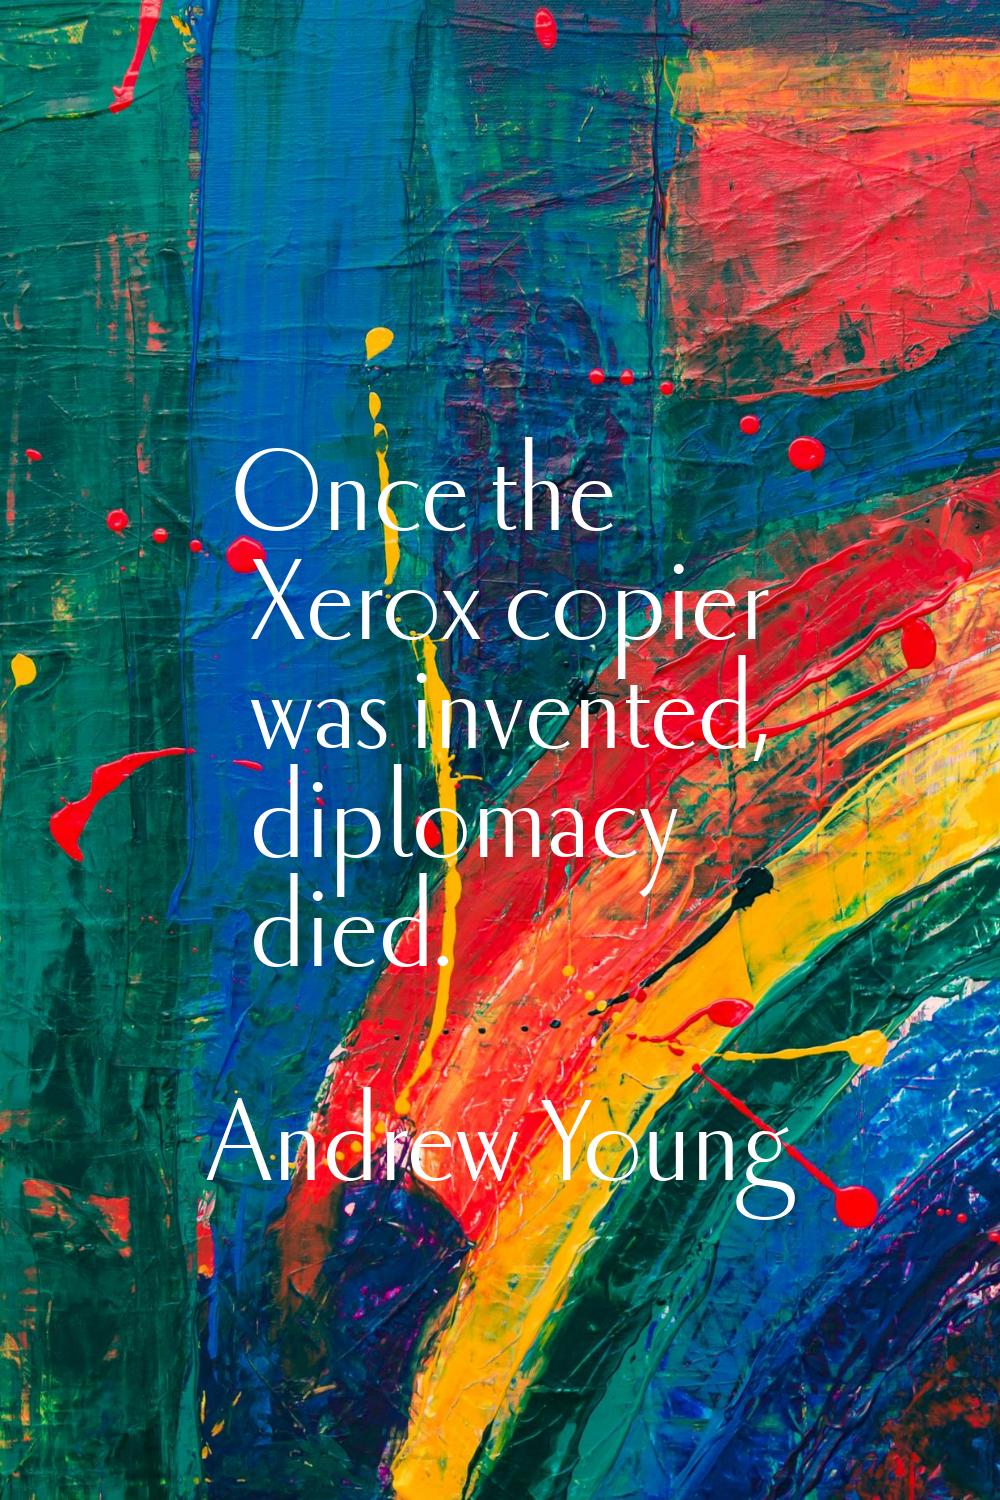 Once the Xerox copier was invented, diplomacy died.